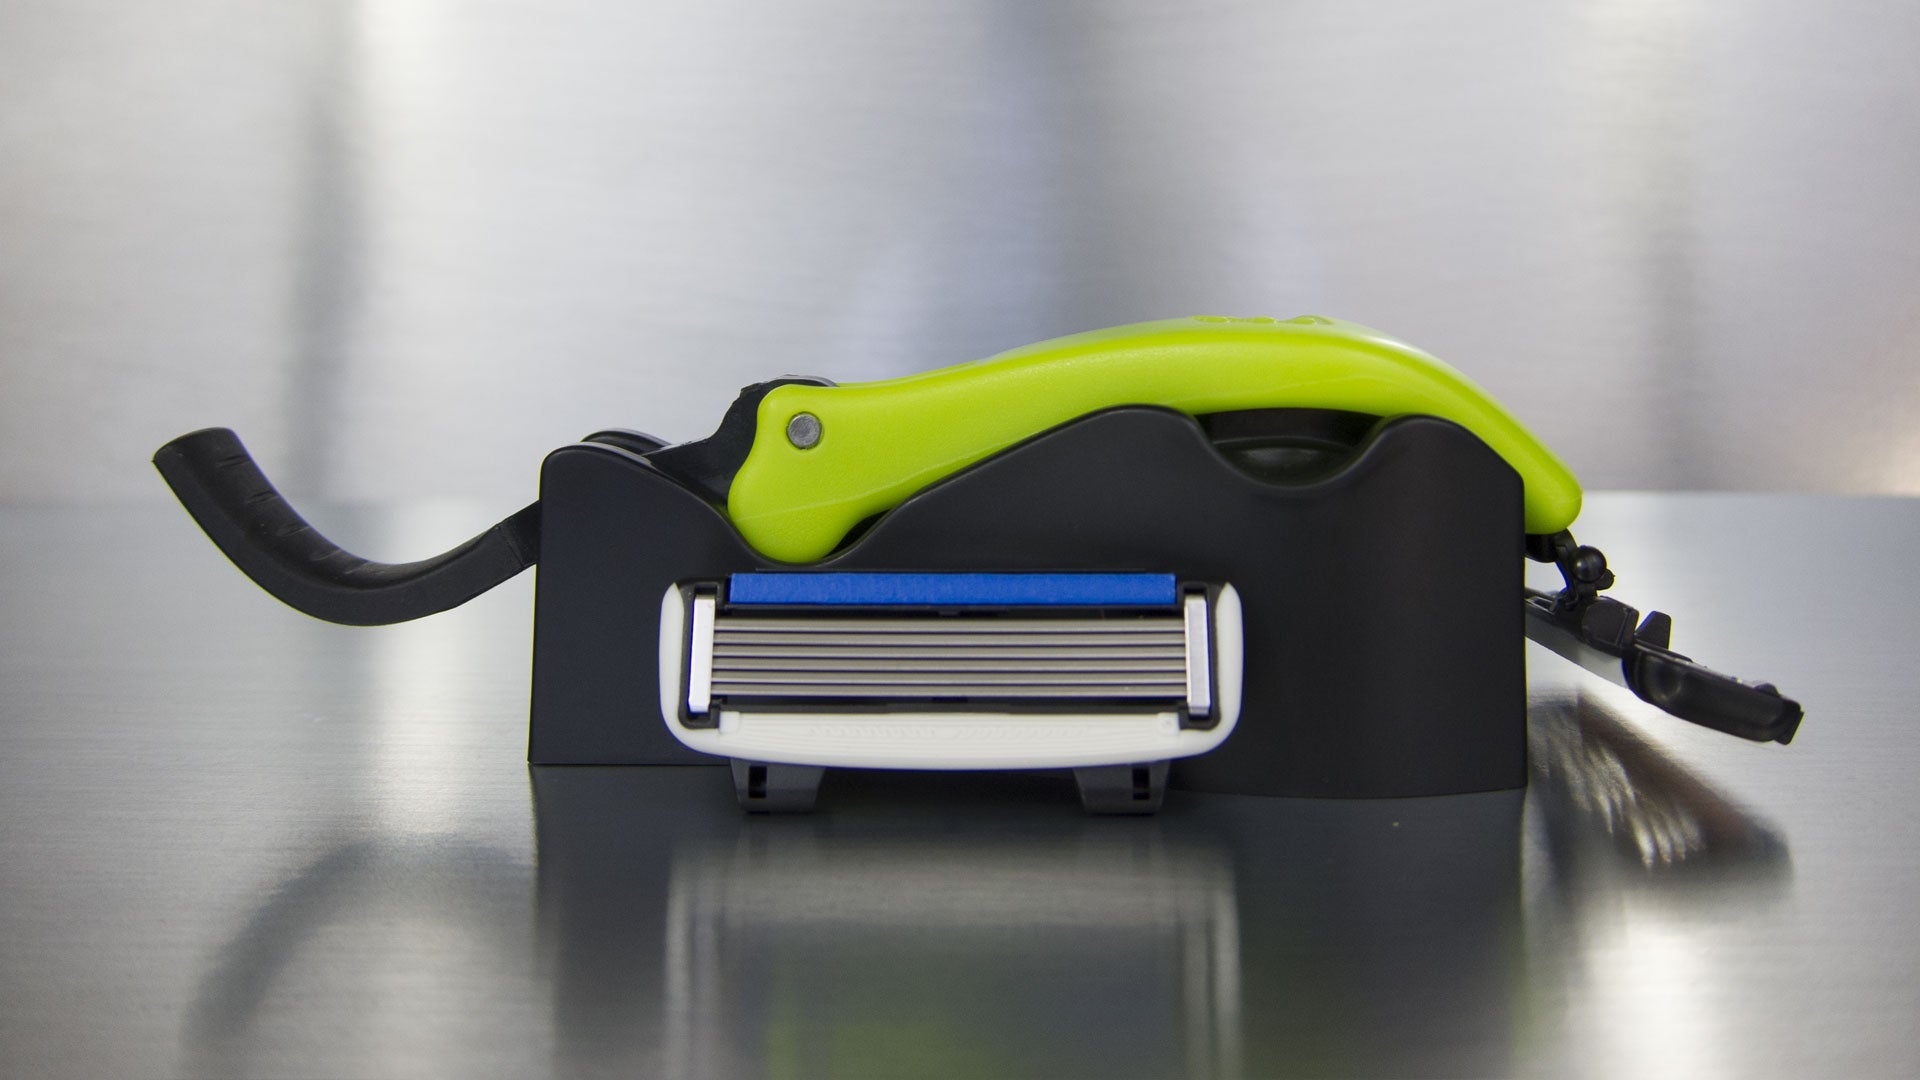 Cobra Razor CR1000 in face position on stand with 6 blade cartridge